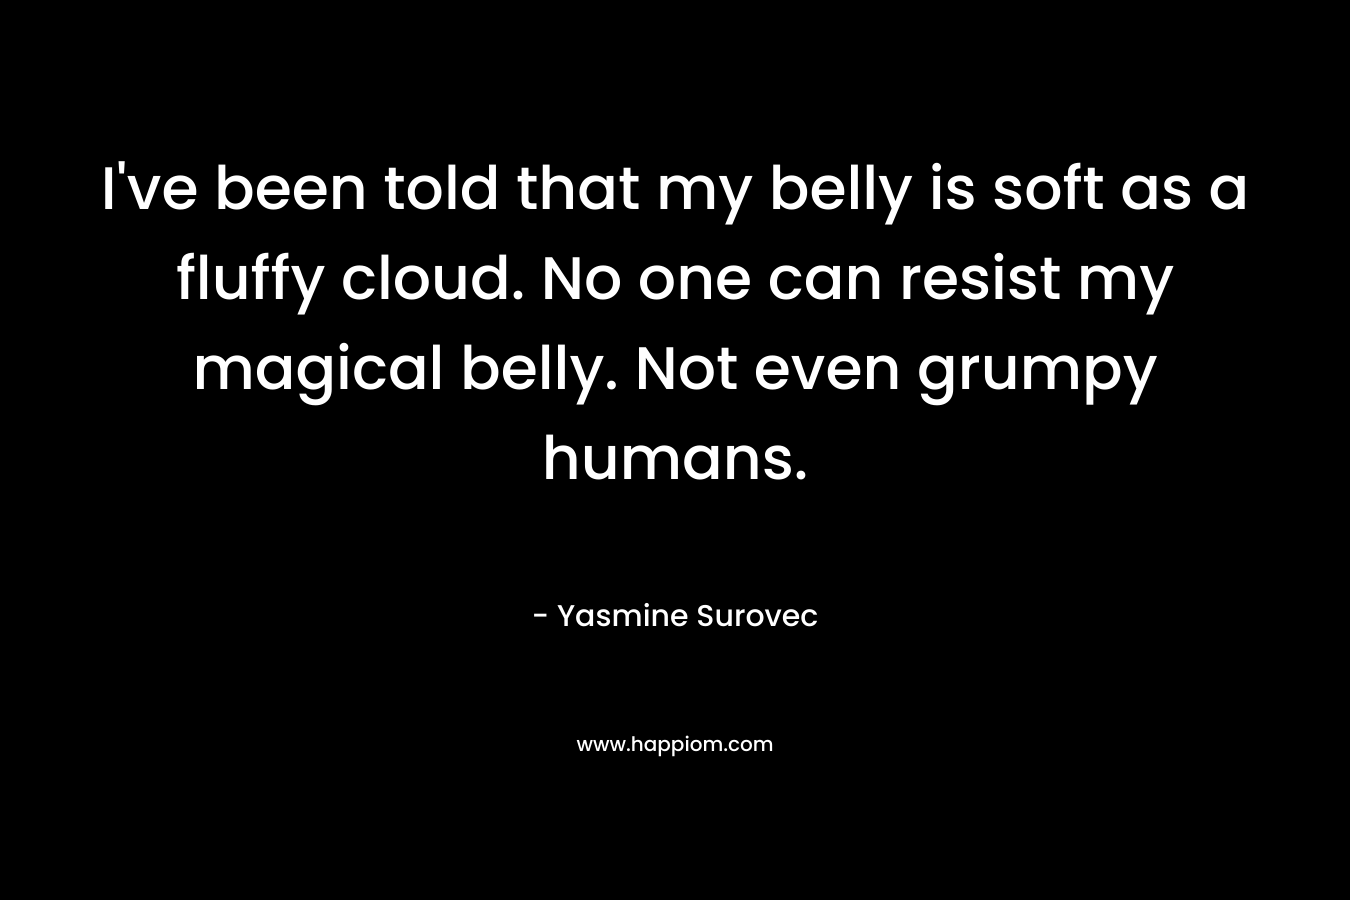 I’ve been told that my belly is soft as a fluffy cloud. No one can resist my magical belly. Not even grumpy humans. – Yasmine Surovec